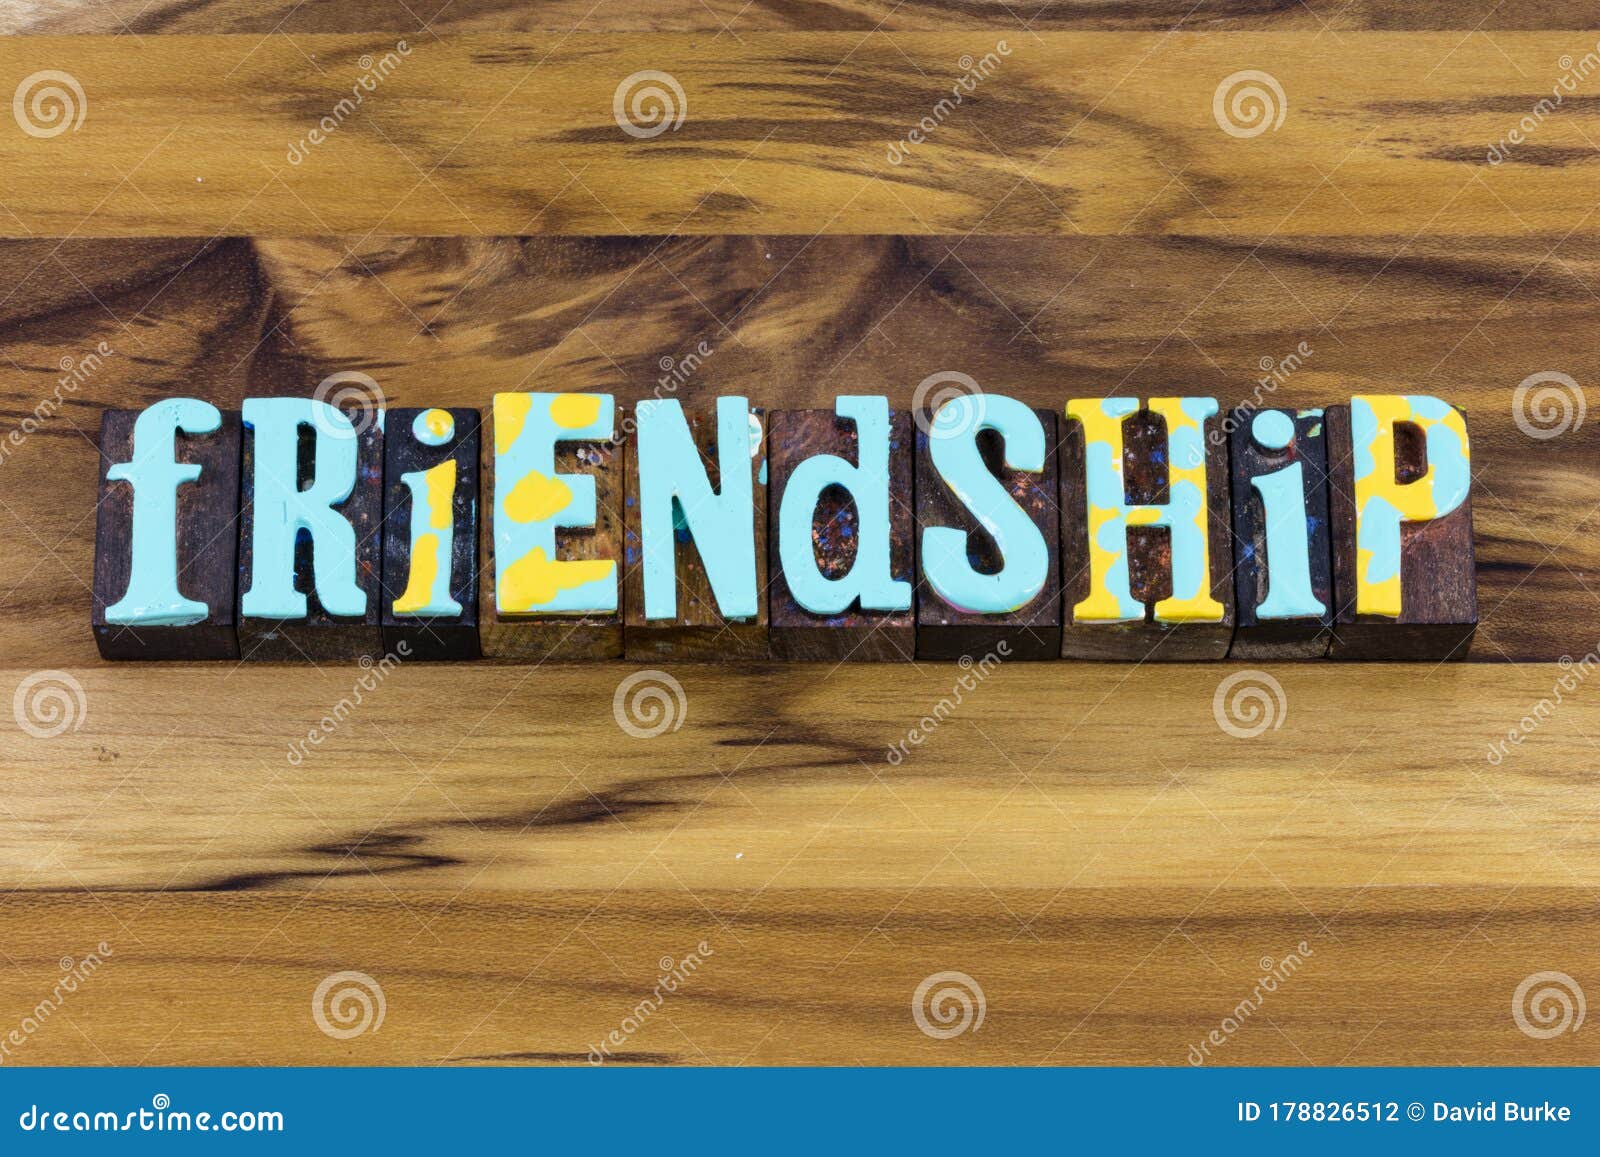 Friends forever.  Happy friendship day, I love my friends, Best